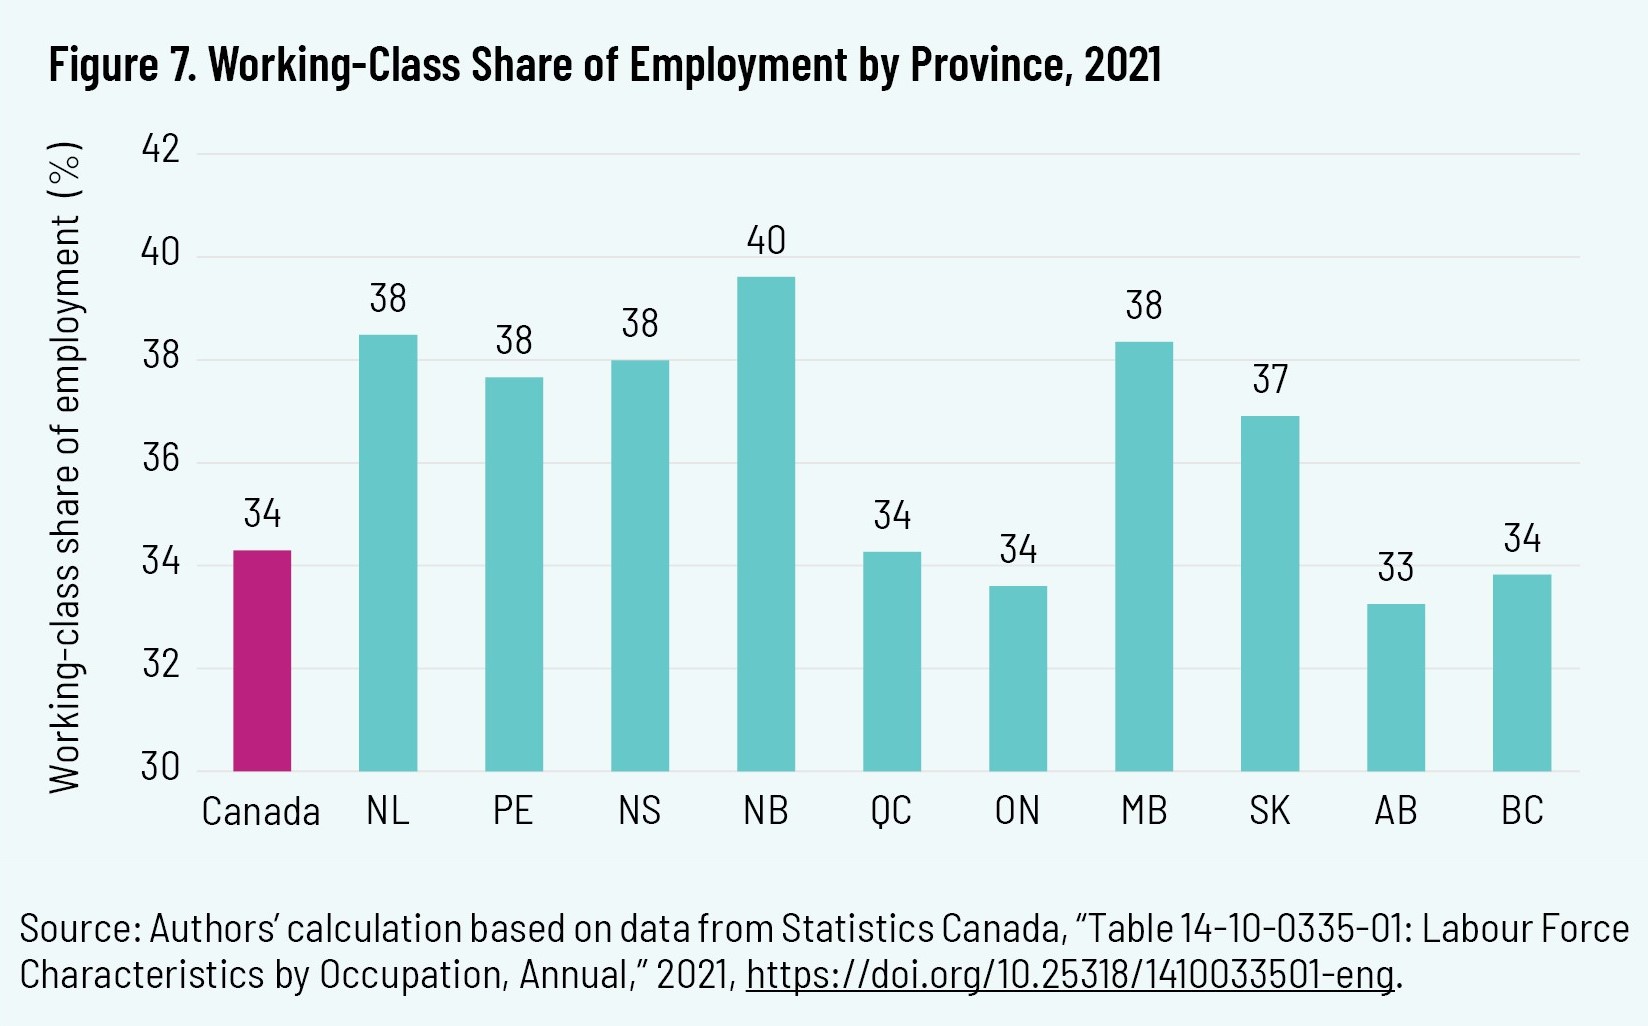 Figure 7. Working-Class Share of Employment by Province, 2021